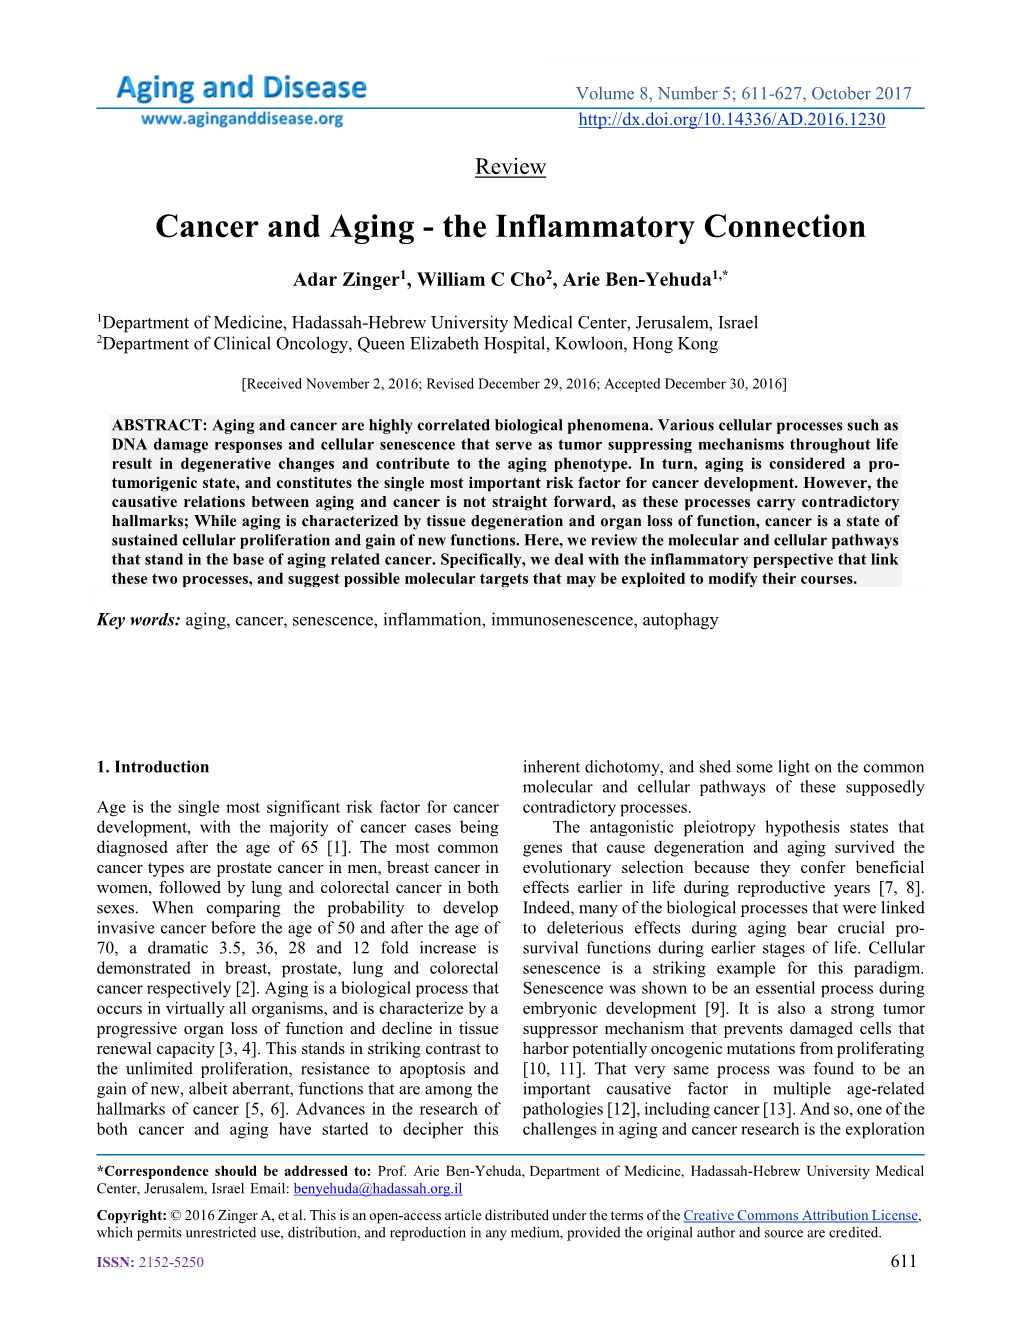 Cancer and Aging-The Inflammatory Connection